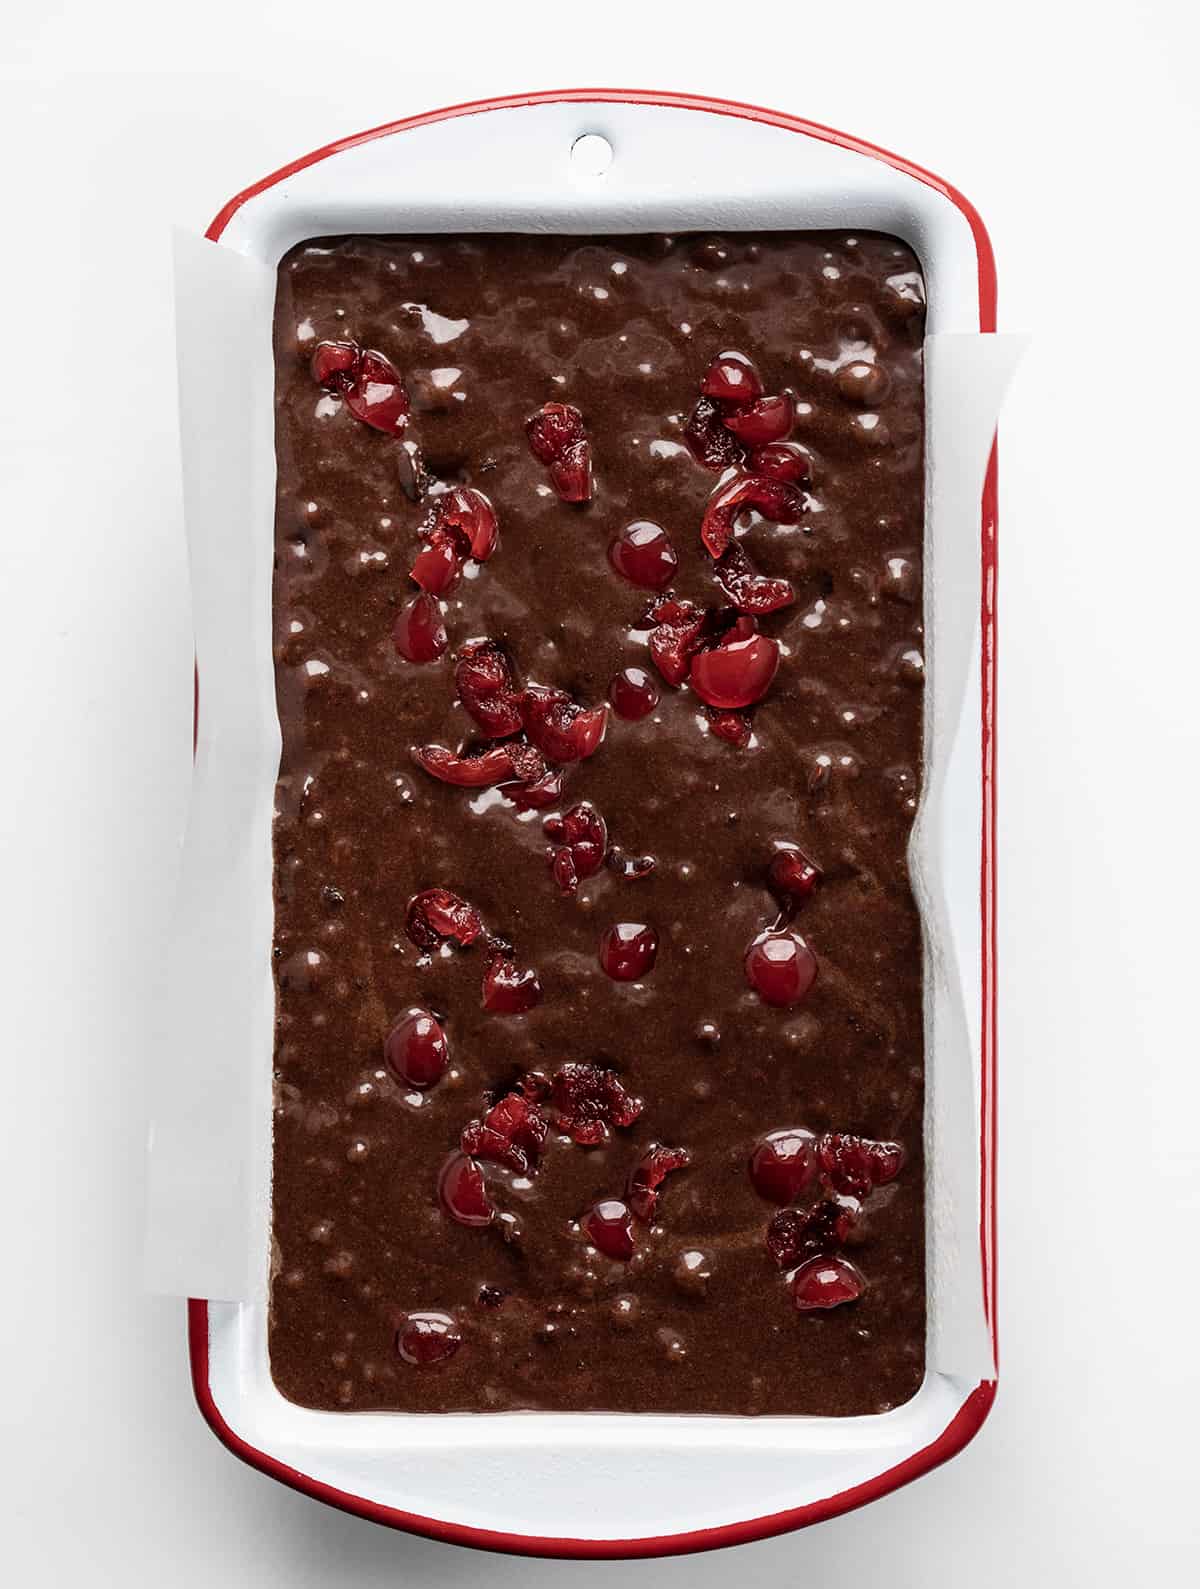 Raw Cherry Brownie Bread Batter in a Pan Showing Cherries.